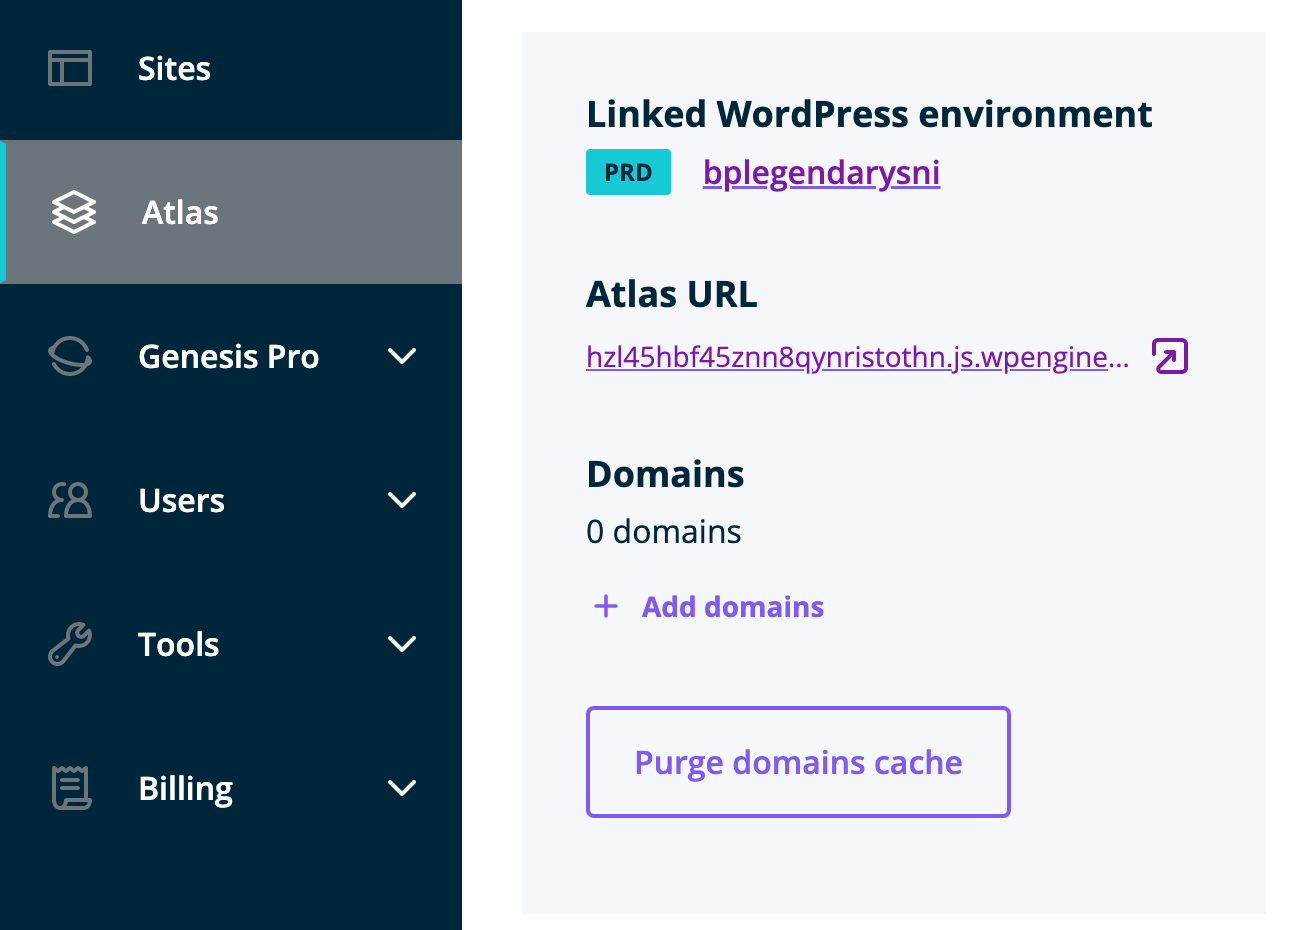 Links to the frontend site and WordPress portal page